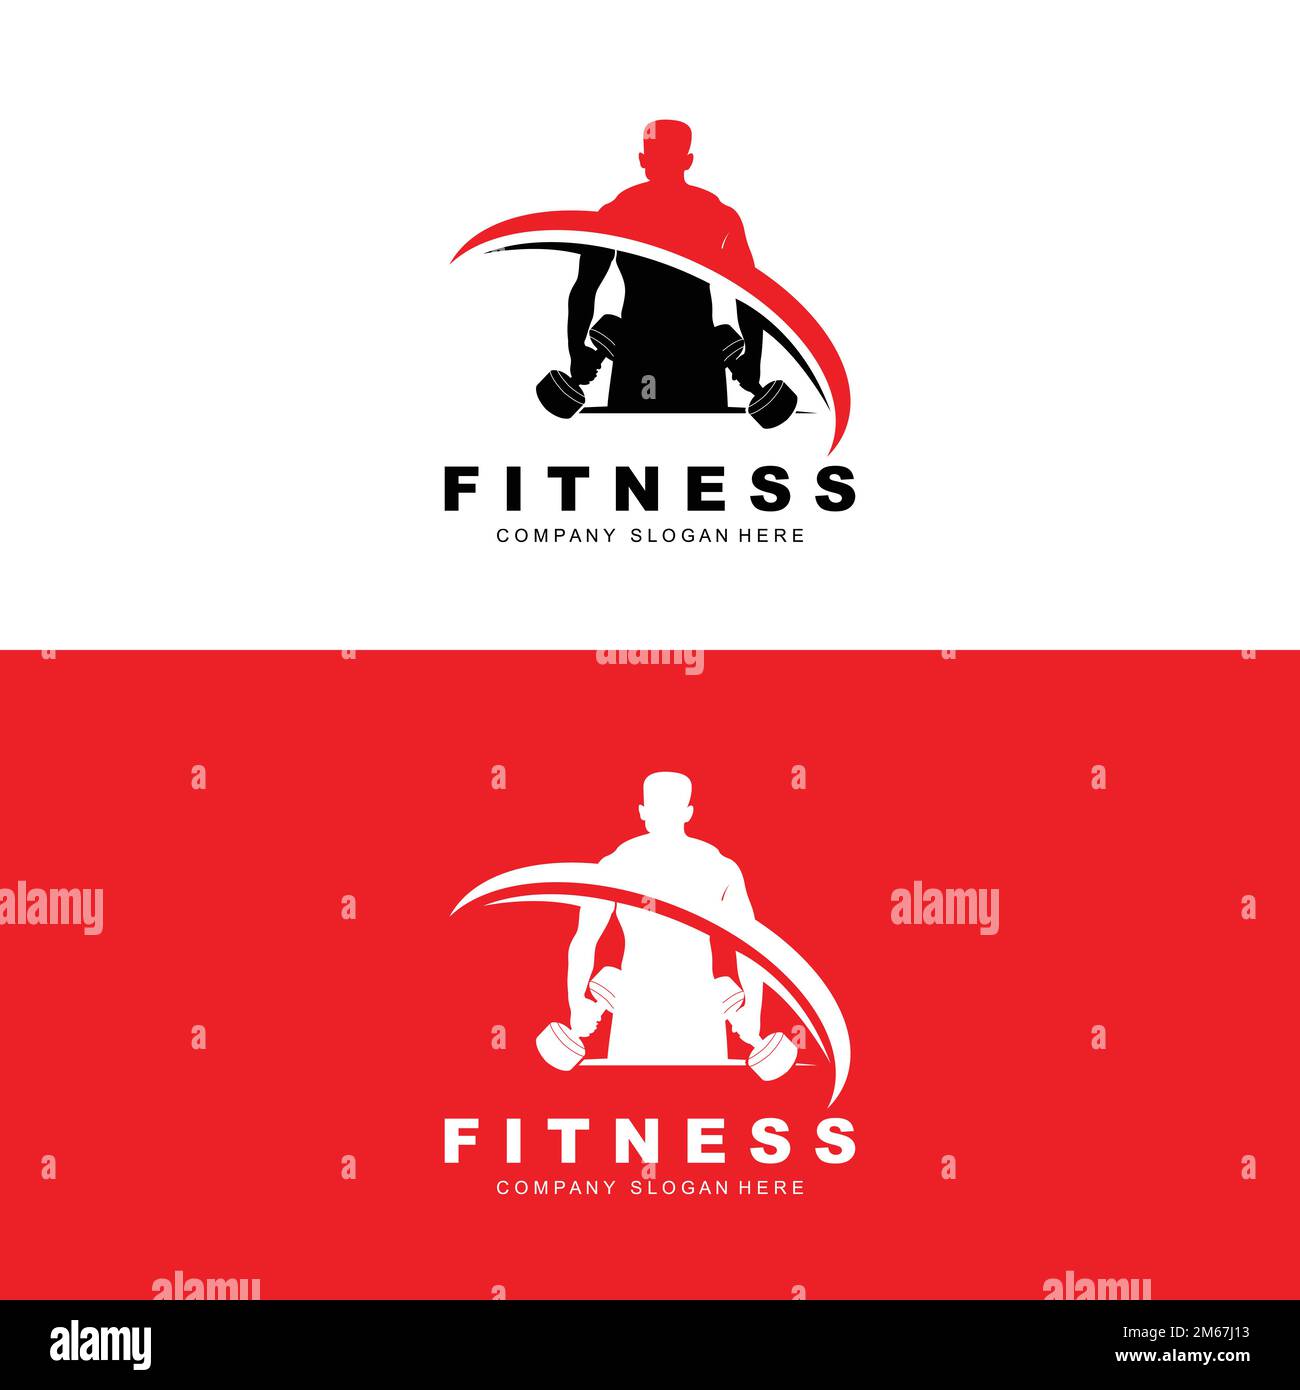 Gym Logo, Fitness Logo Vector, Design Suitable For Fitness, Sports Equipment, Body Health, Body Supplement Product Brands Stock Vector